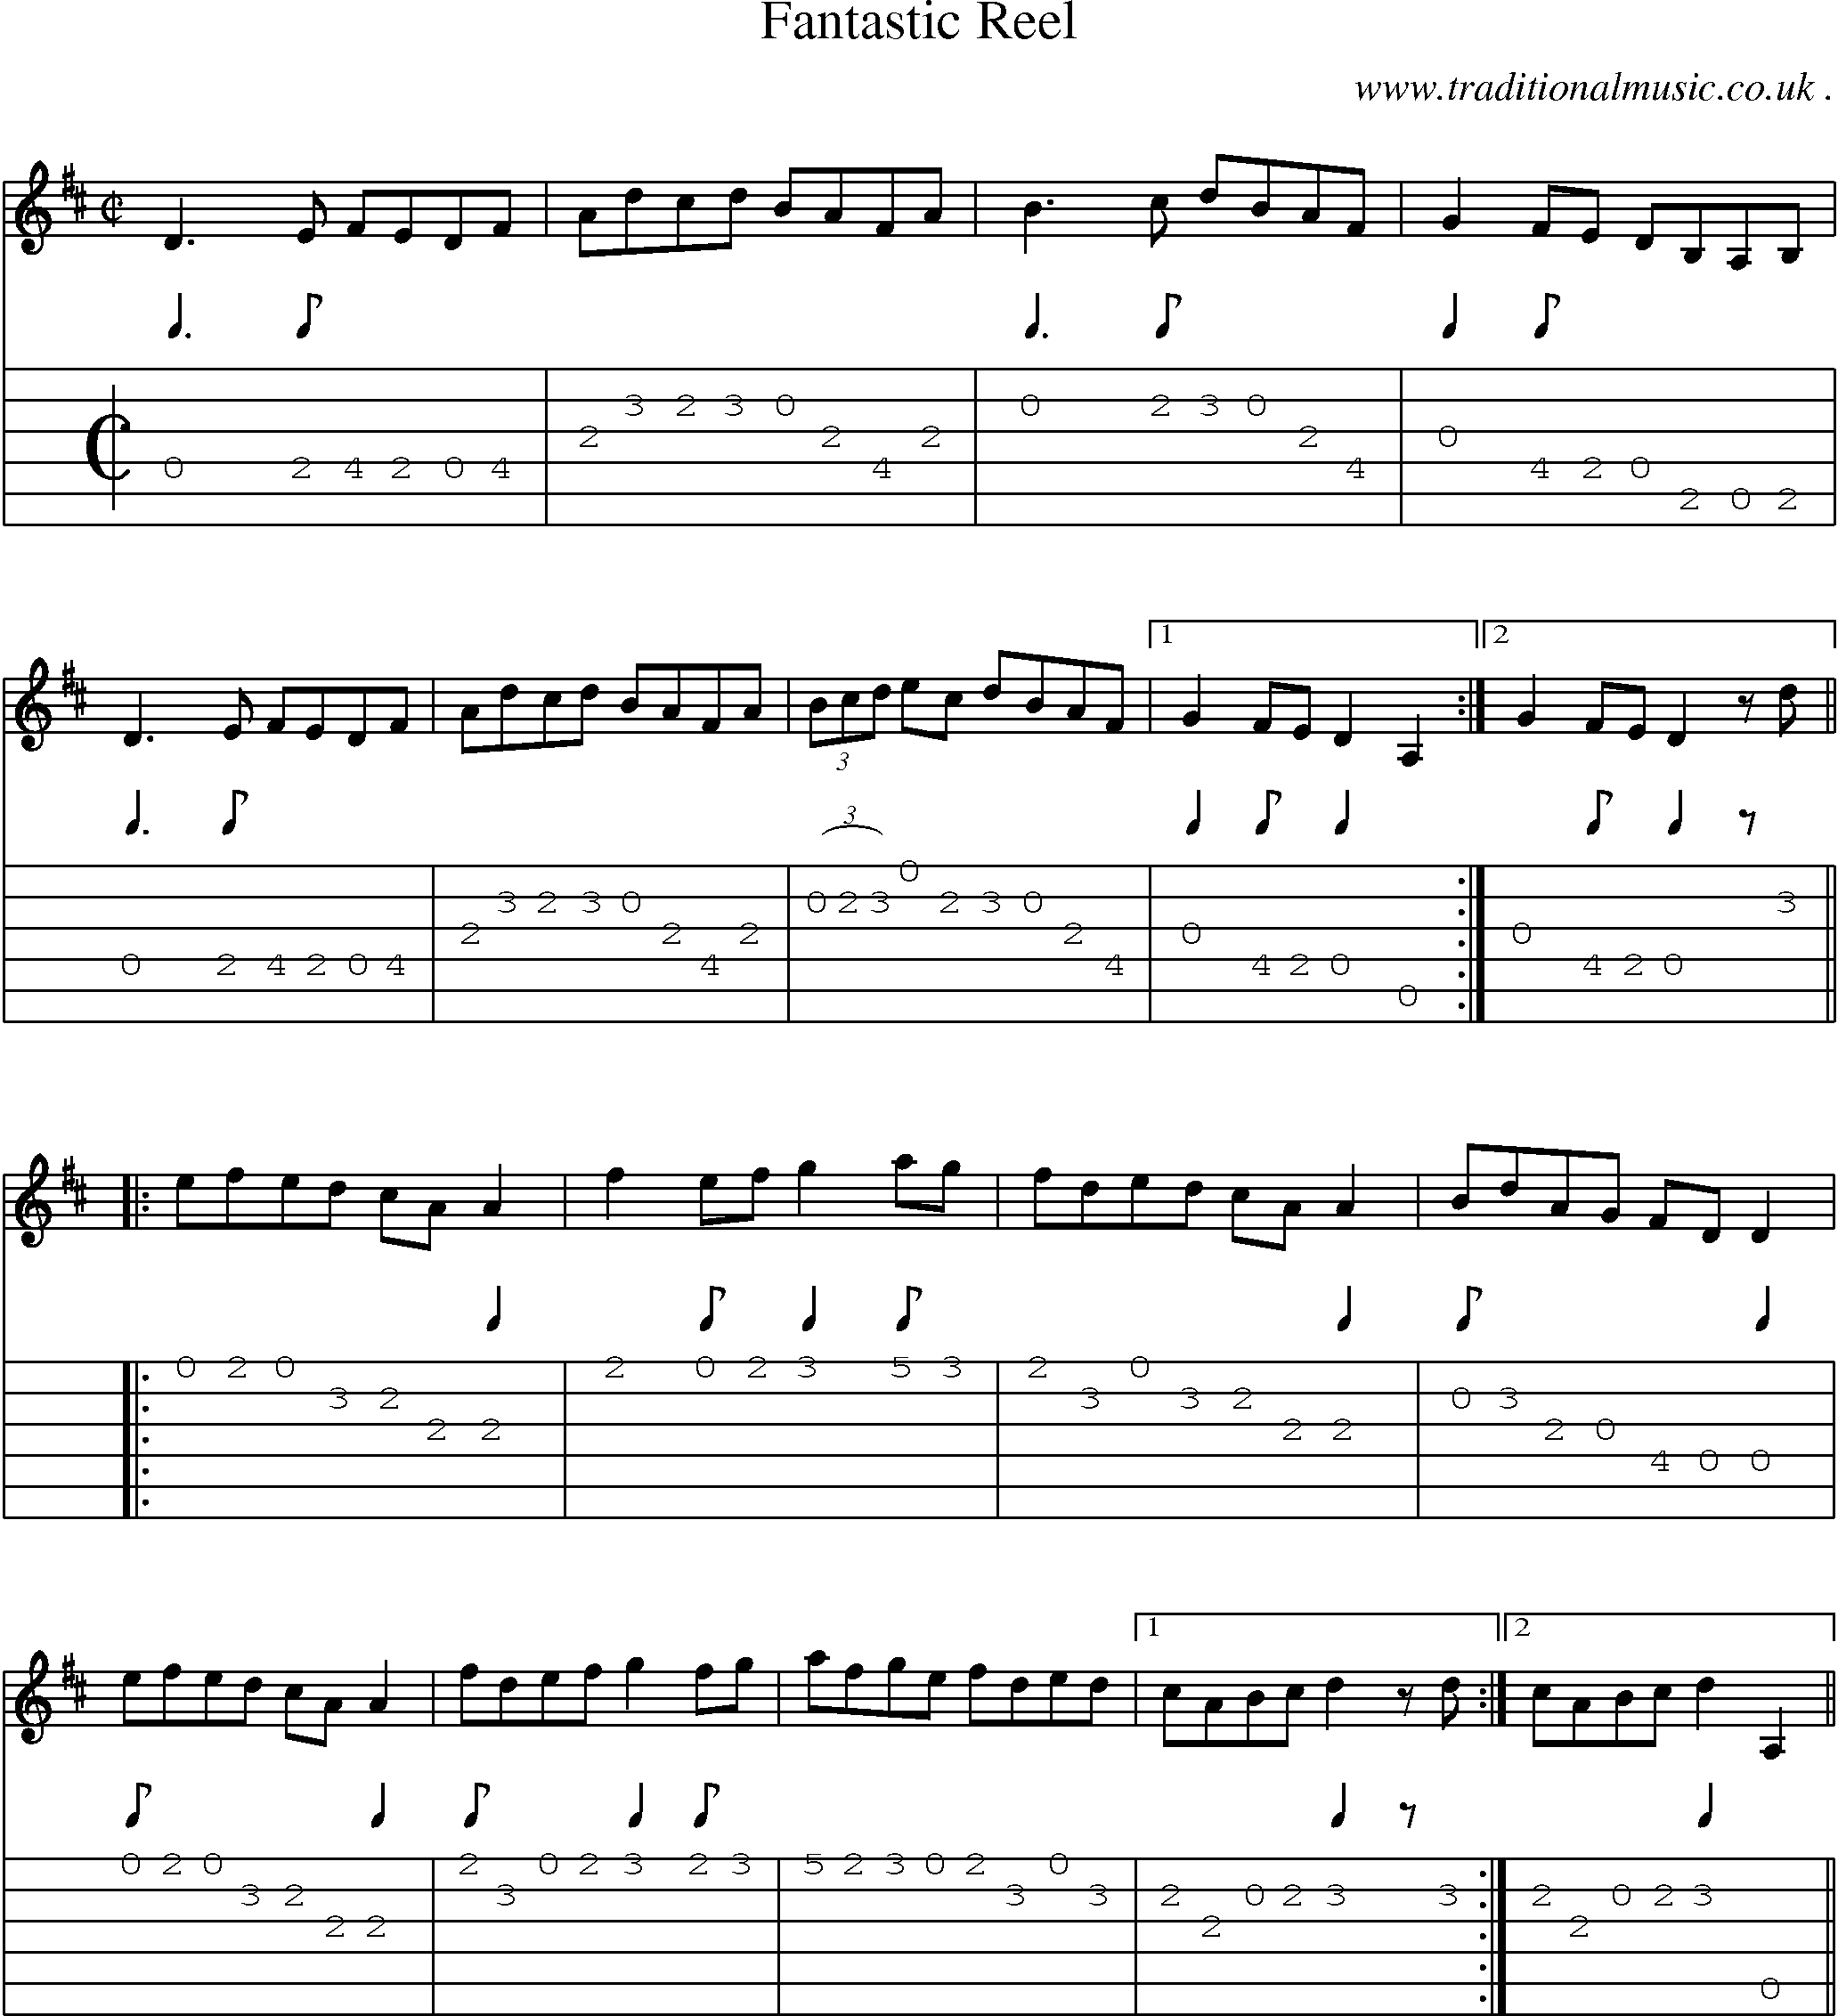 Sheet-Music and Guitar Tabs for Fantastic Reel